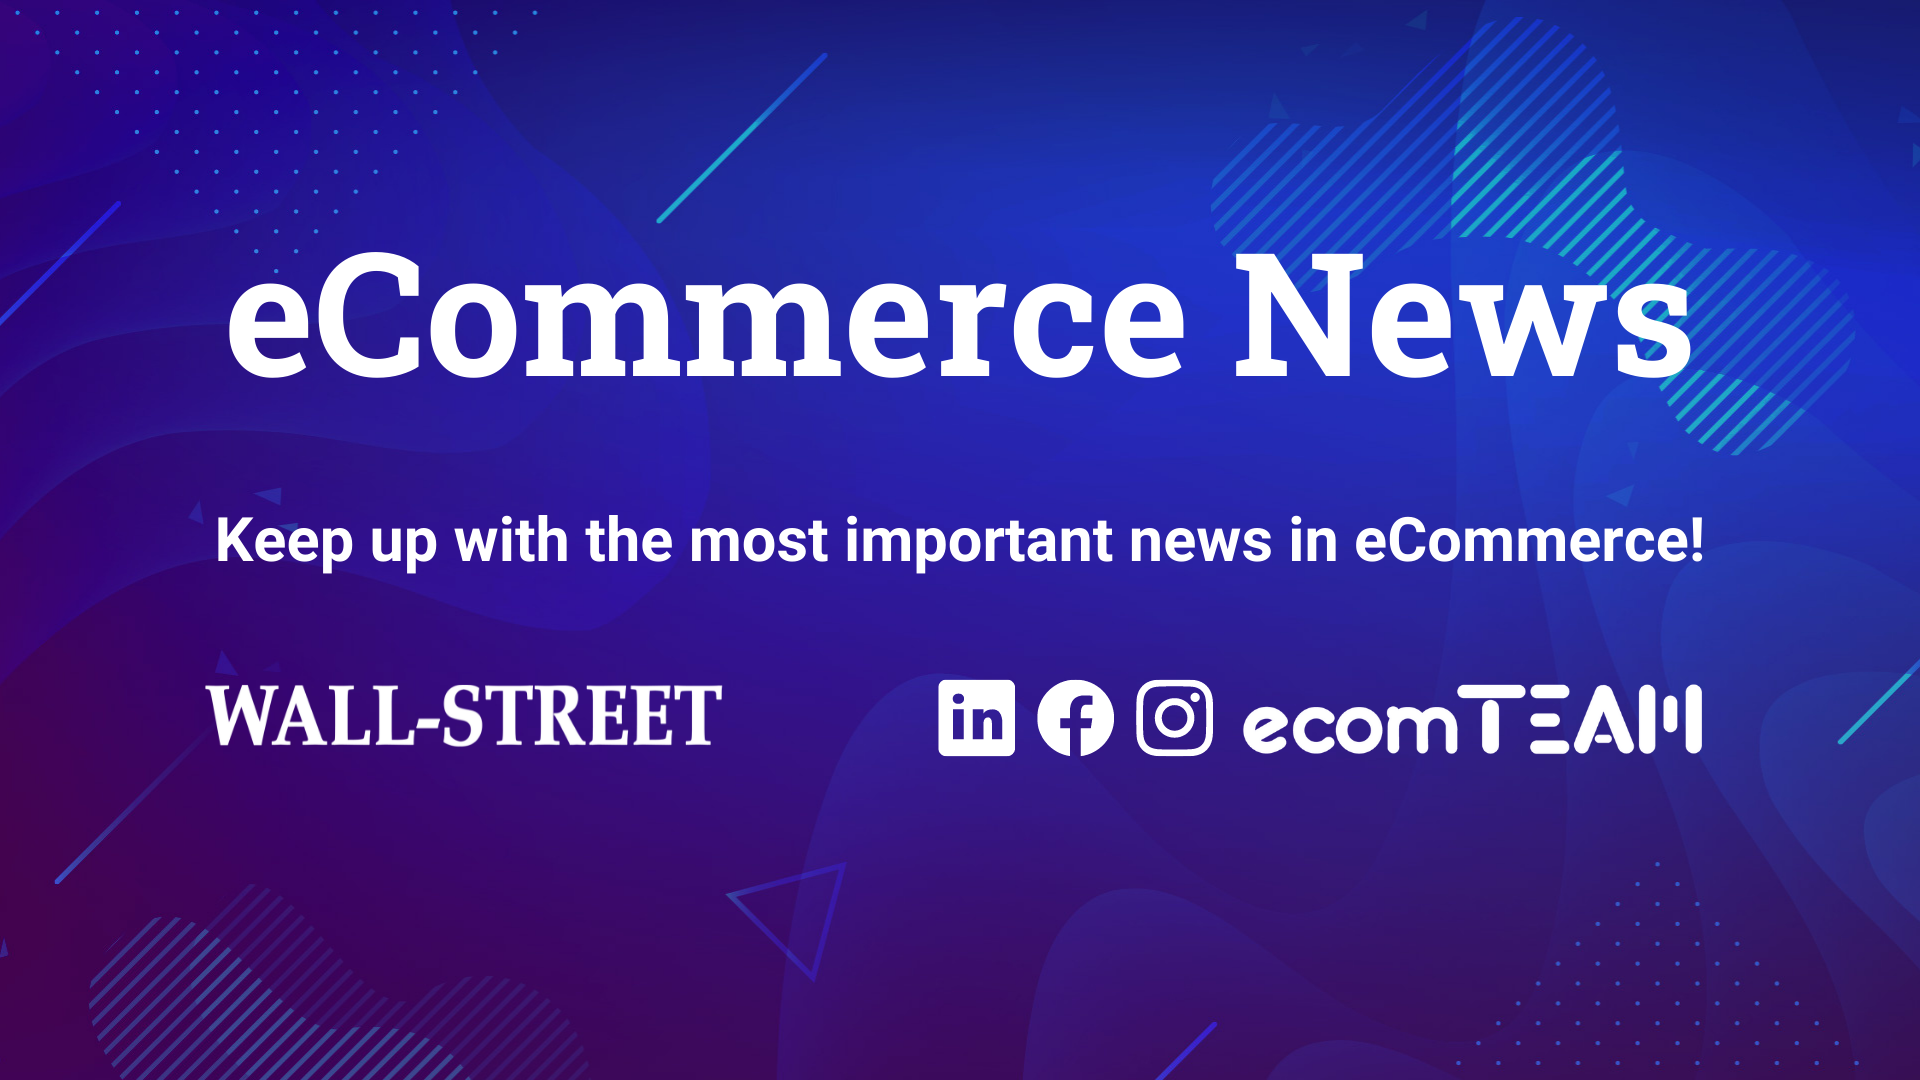 Roweb is ready to meet its future clients at ecomTeam 2022, An eCommerce  event that brings together important names from the industry